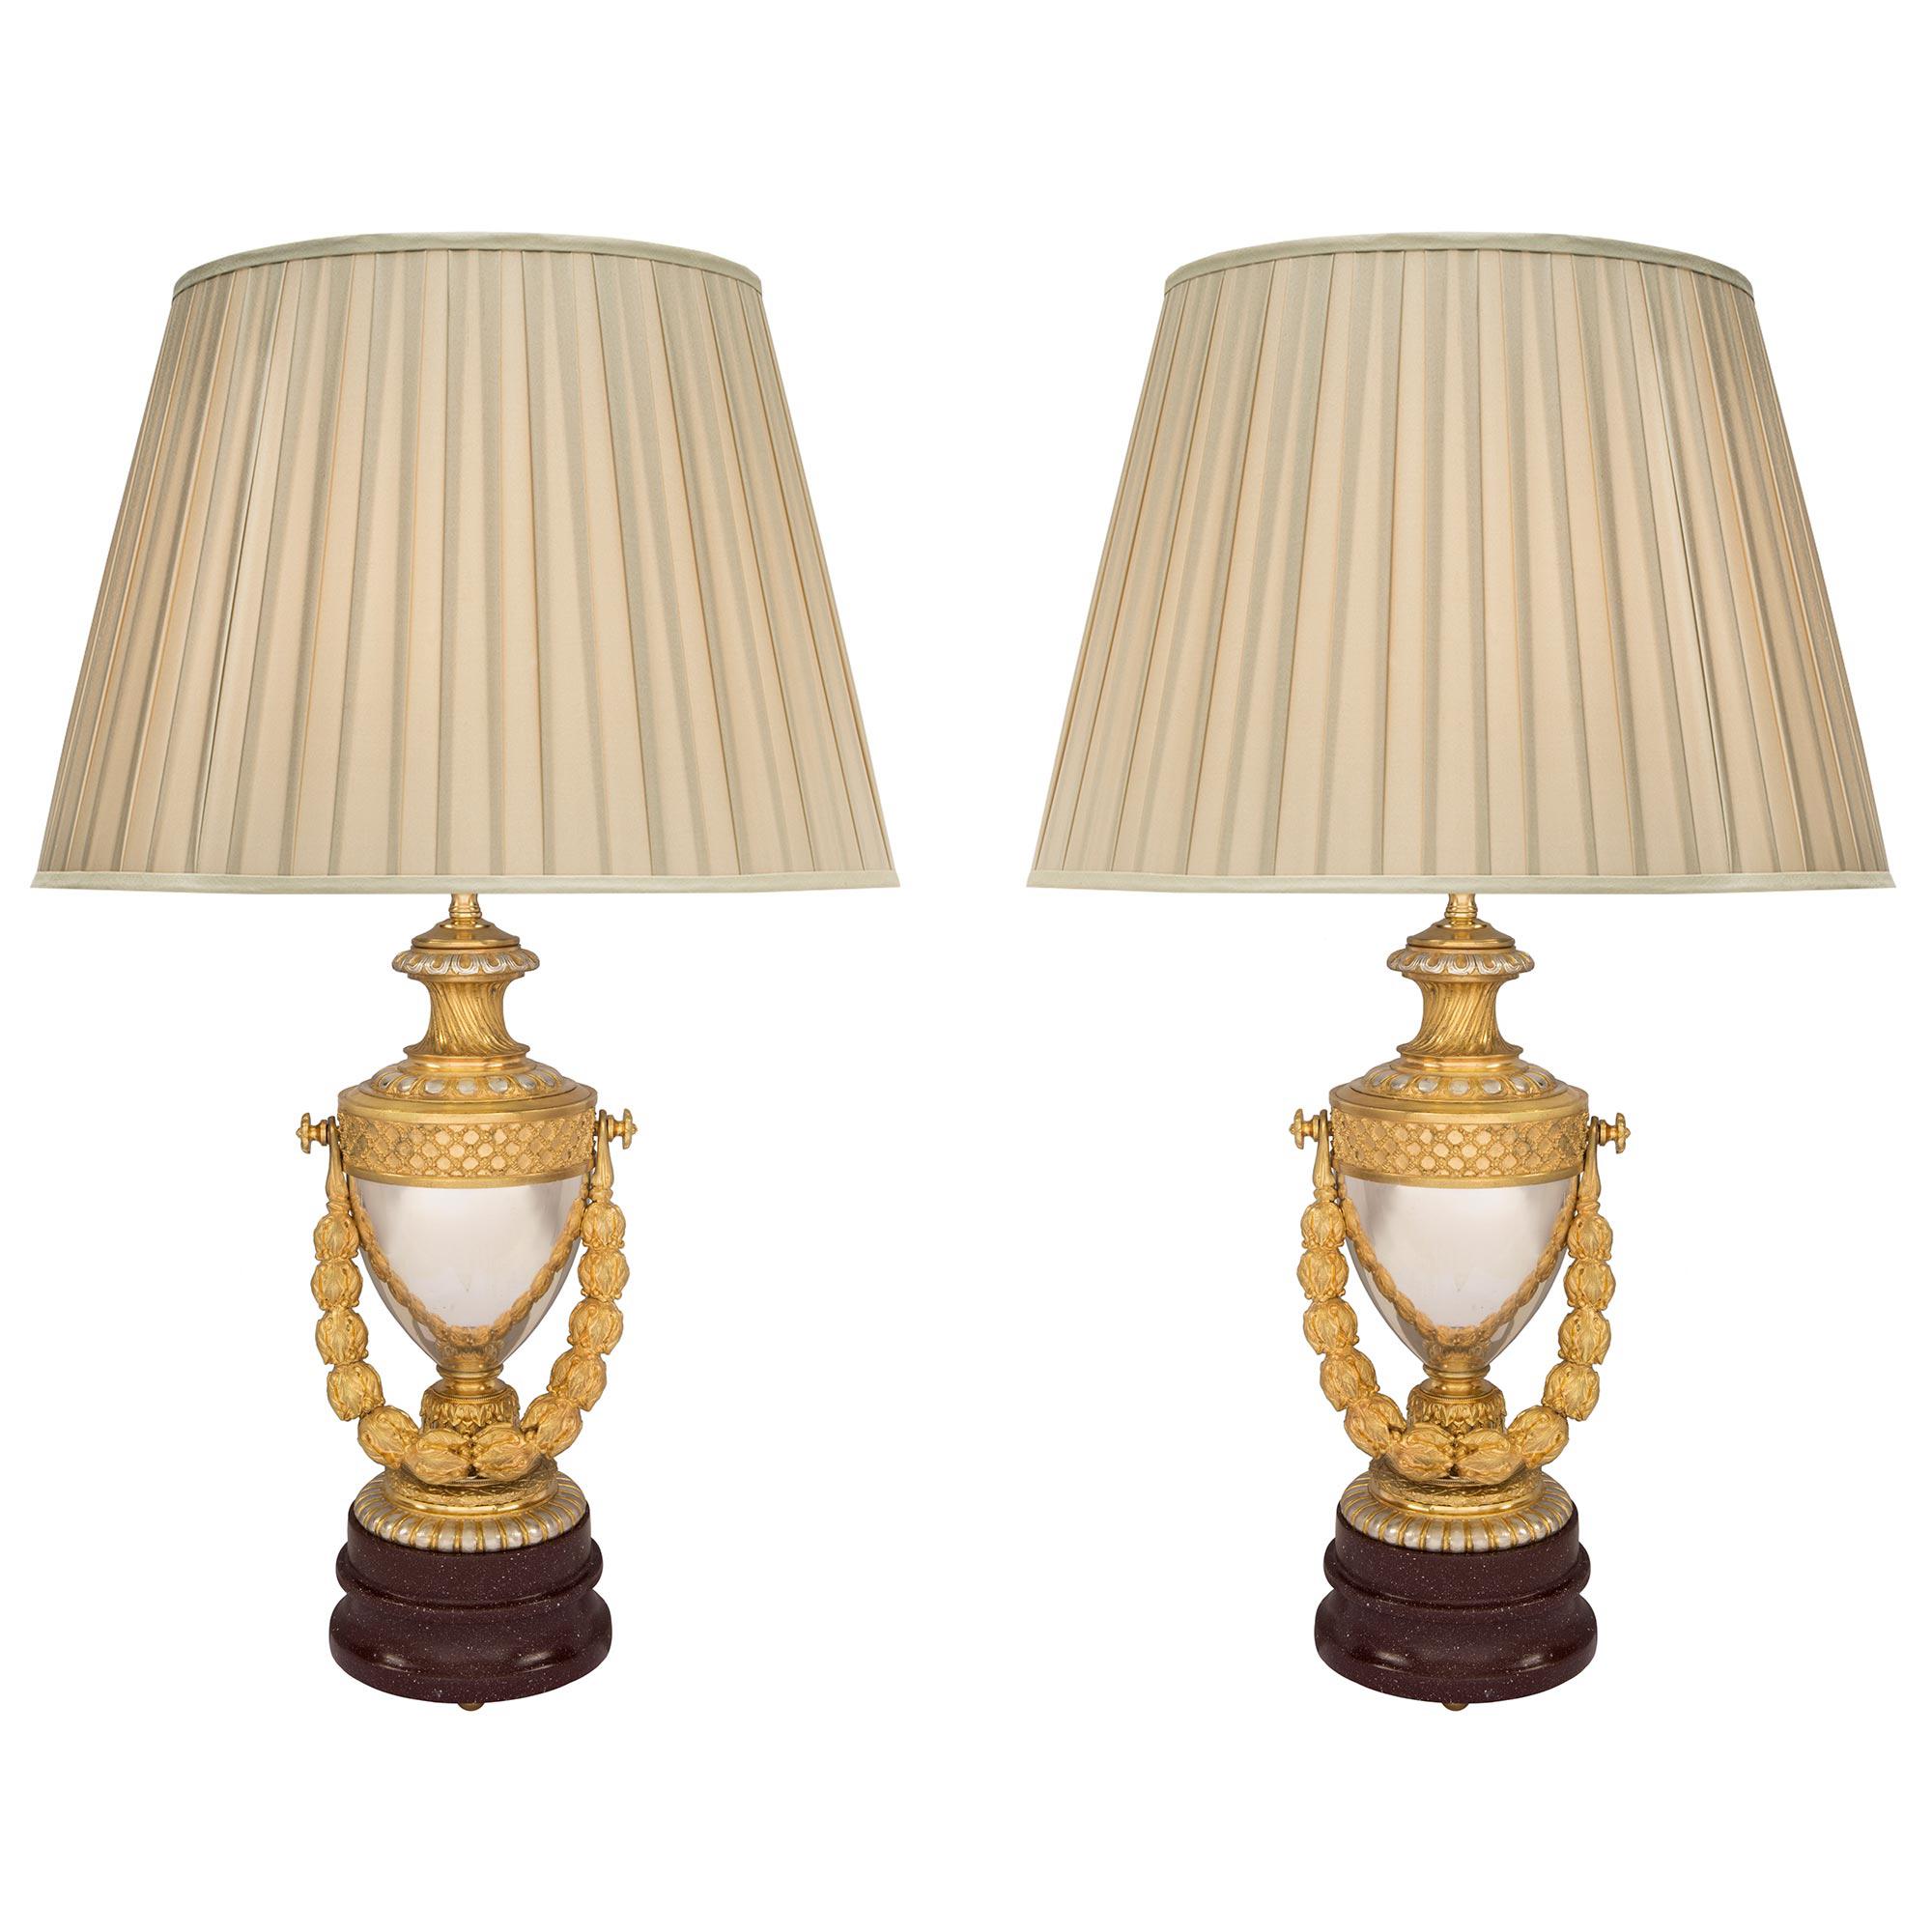 Pair of 19th Century Louis XVI Style Ormolu, Bronze and Faux Marble Lamps